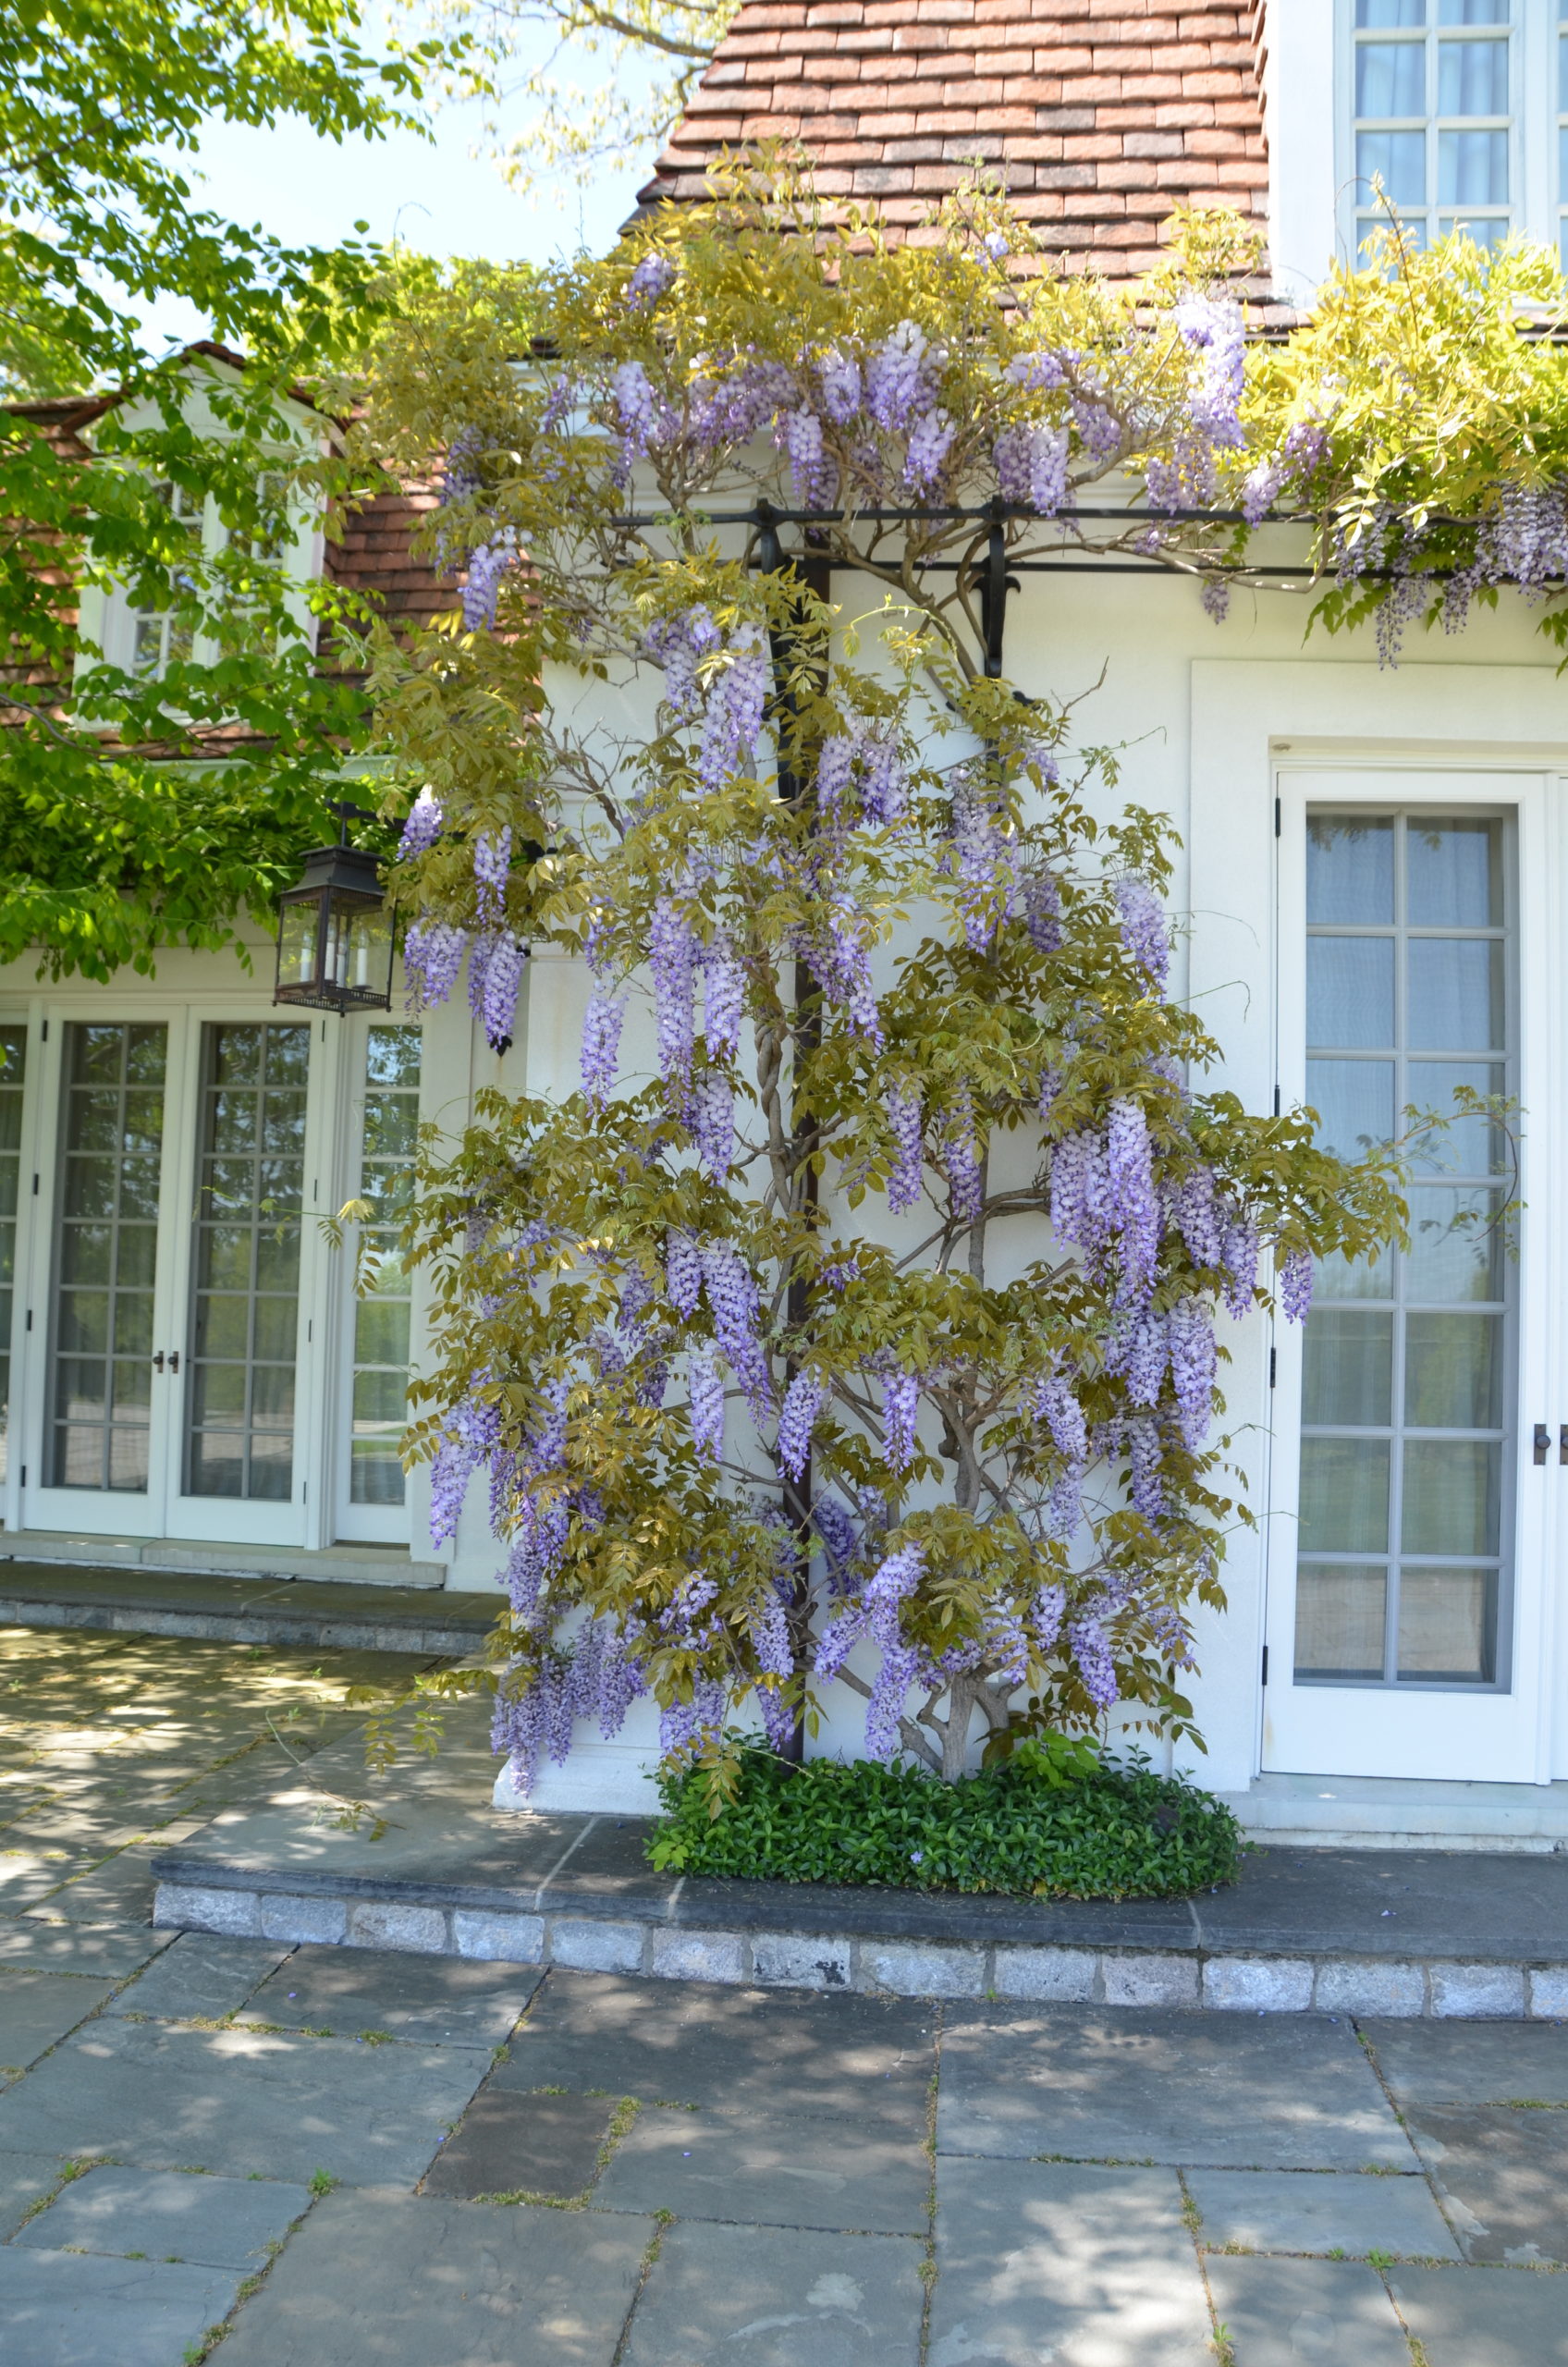 This wisteria support structure, drilled into the house, runs up from the ground to where it meets the horizontal bars. ANDREW MESSINGER